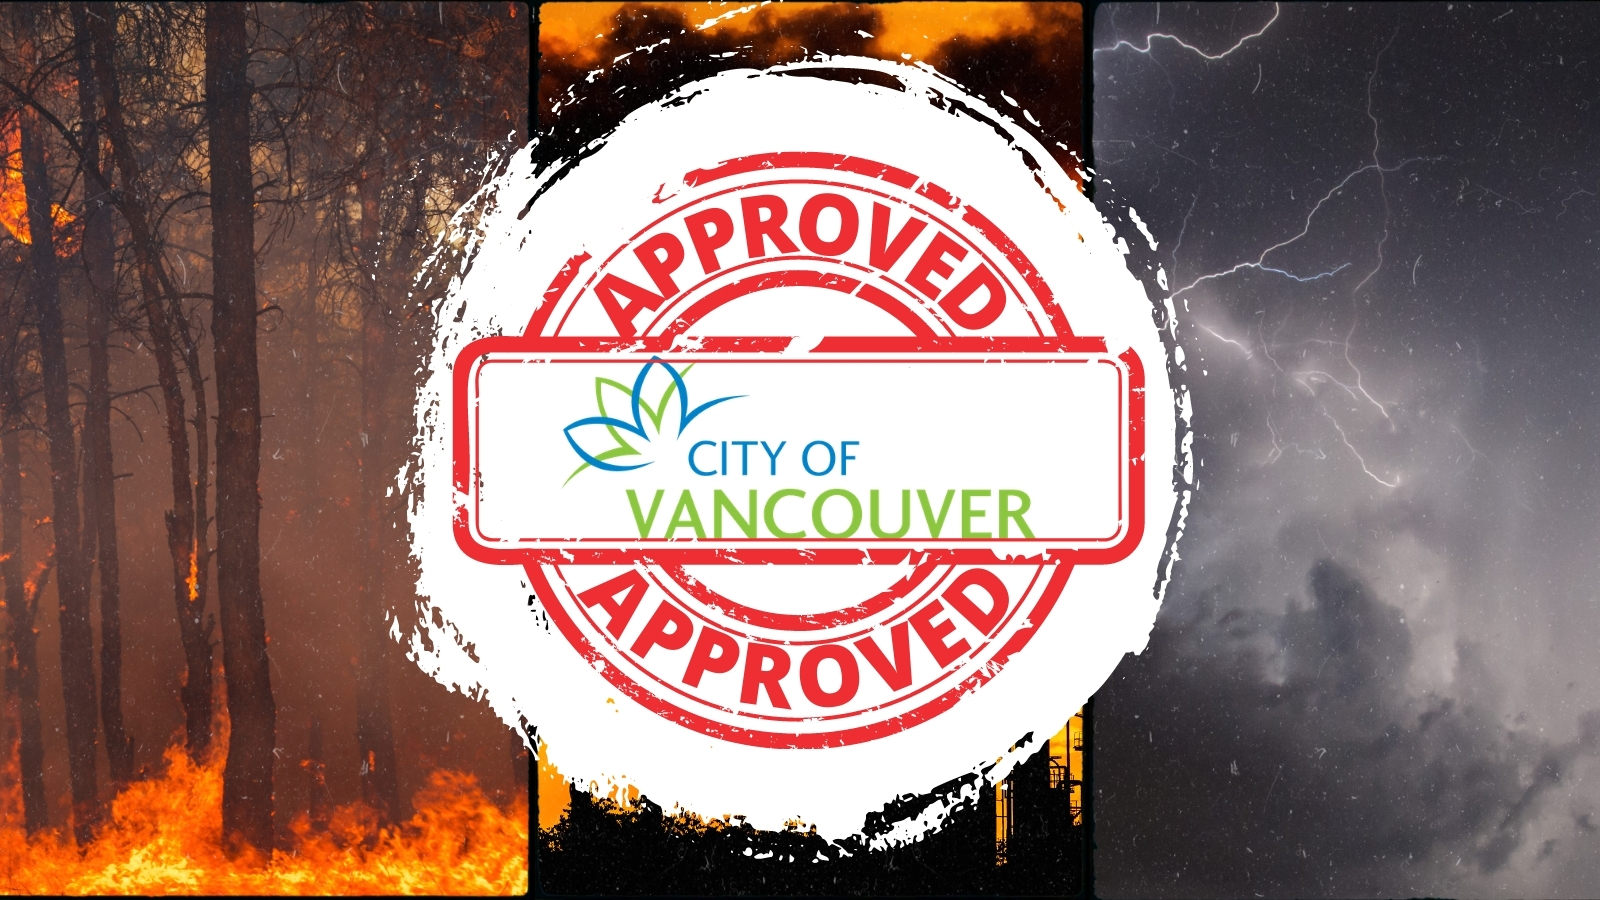 Triptych of wildfire and storms, with a central graphic of an "Approved" stamp and the City of Vancouver's logo in the centre.